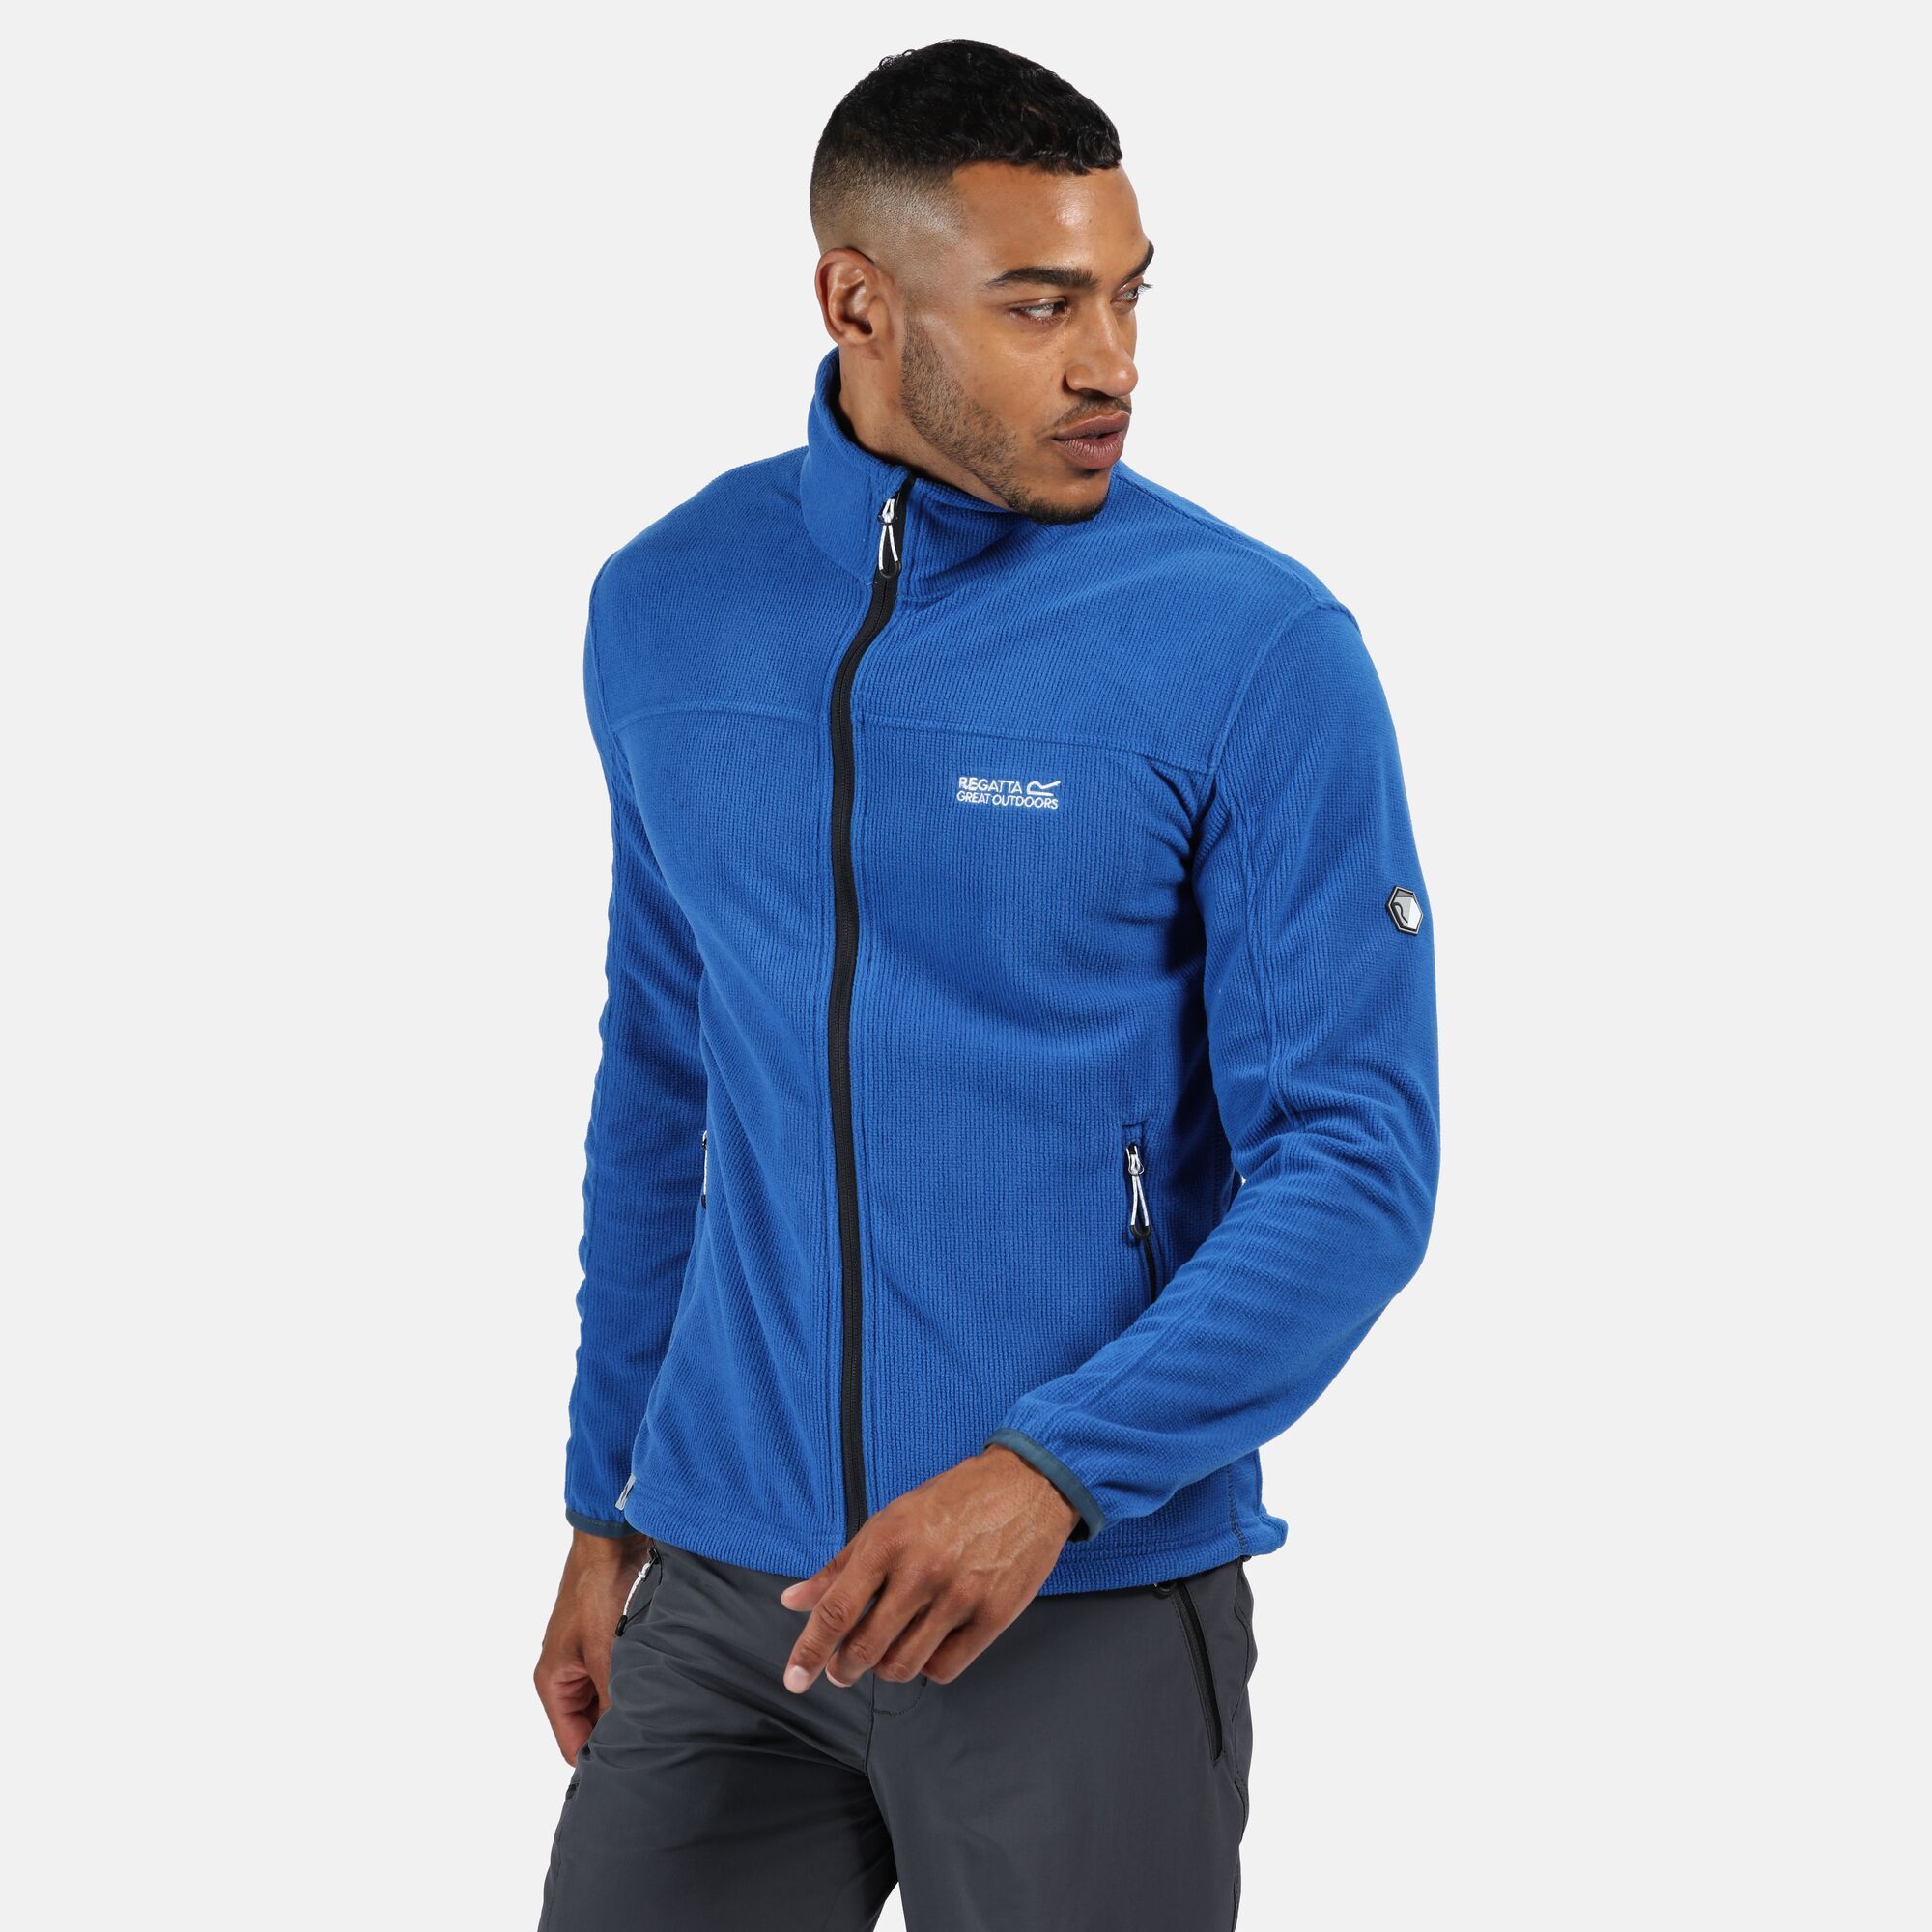 Material: 100% Polyester. Zip sweater with 180gsm mini-grid fleece fabric with one side brushed. Stand collar, adjustable shock-cord hem and stretch binding. 2 zipped lower pockets. Regatta outdoors logo embroidery on the chest.